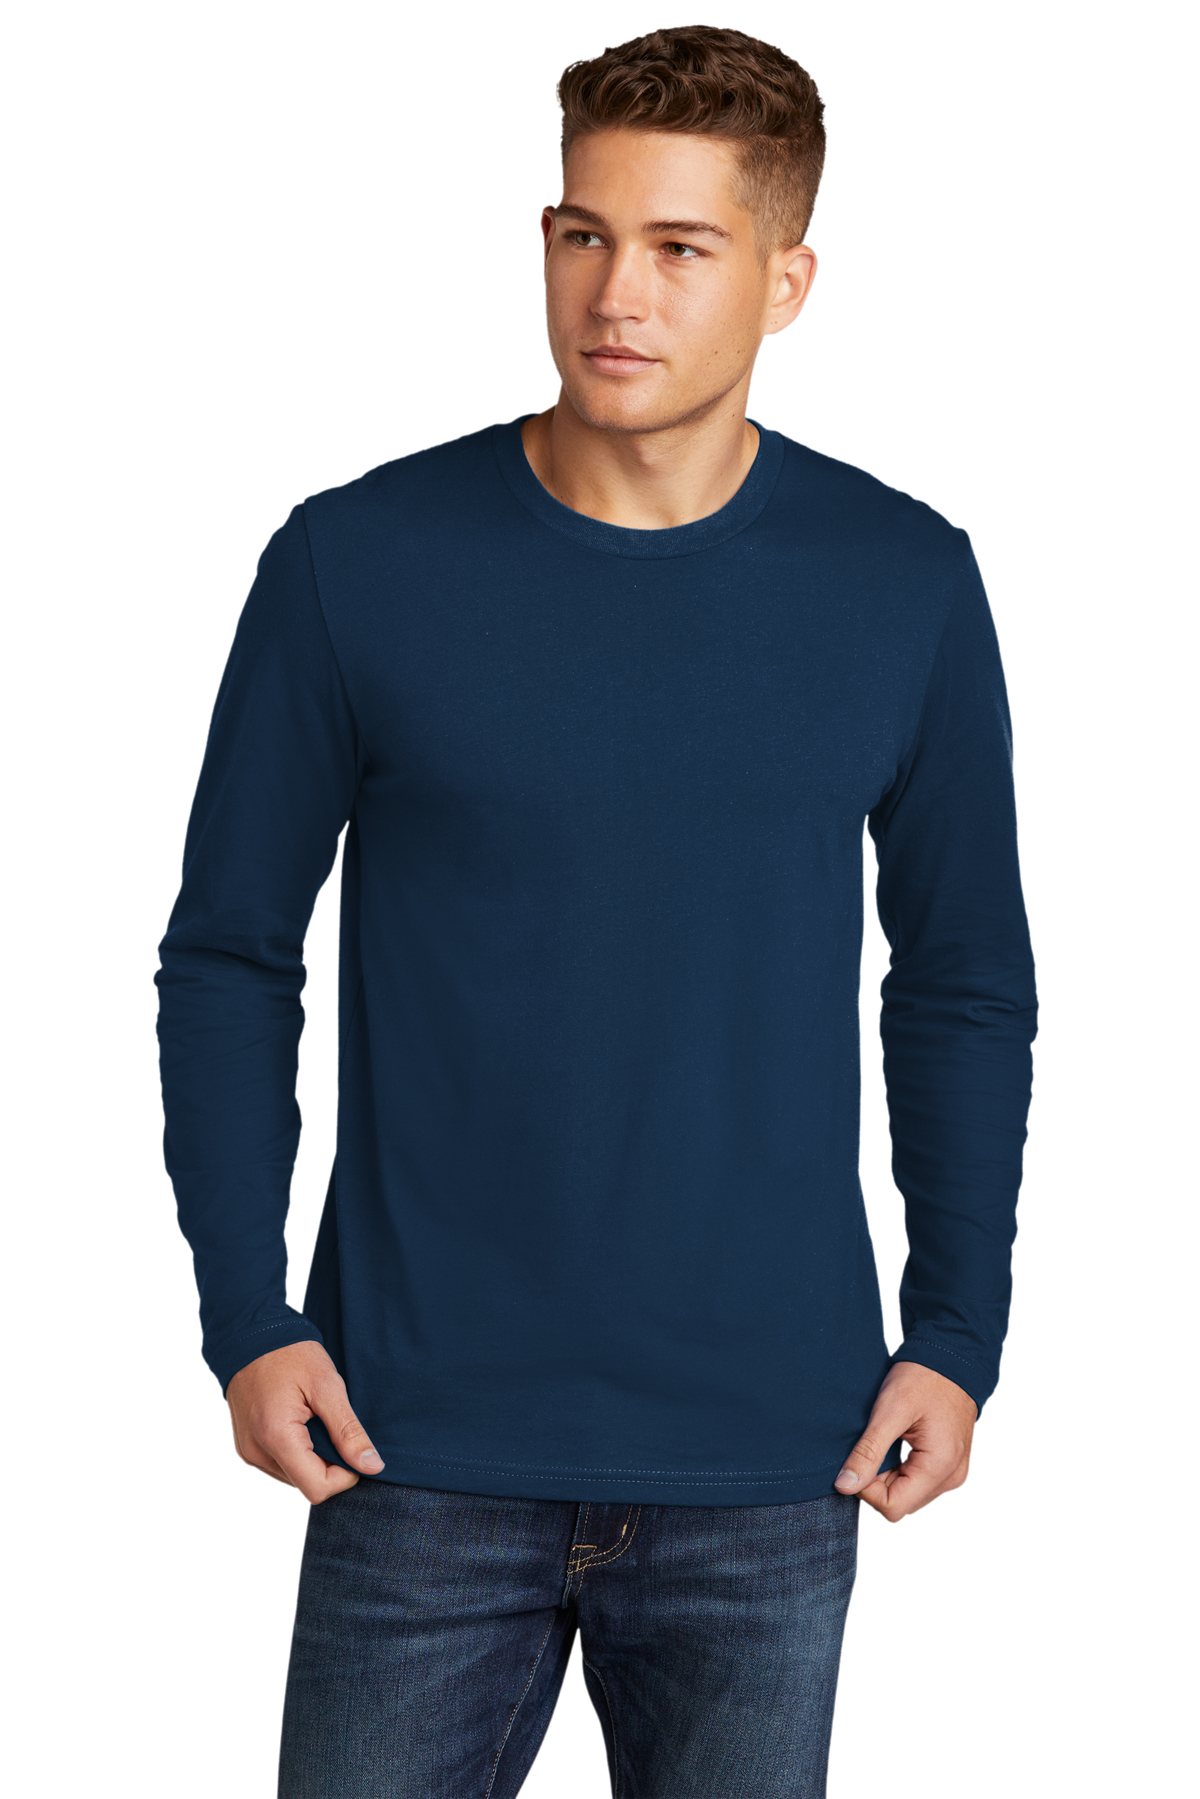 Next Level Apparel Cotton Long Sleeve Tee | Product | Company Casuals